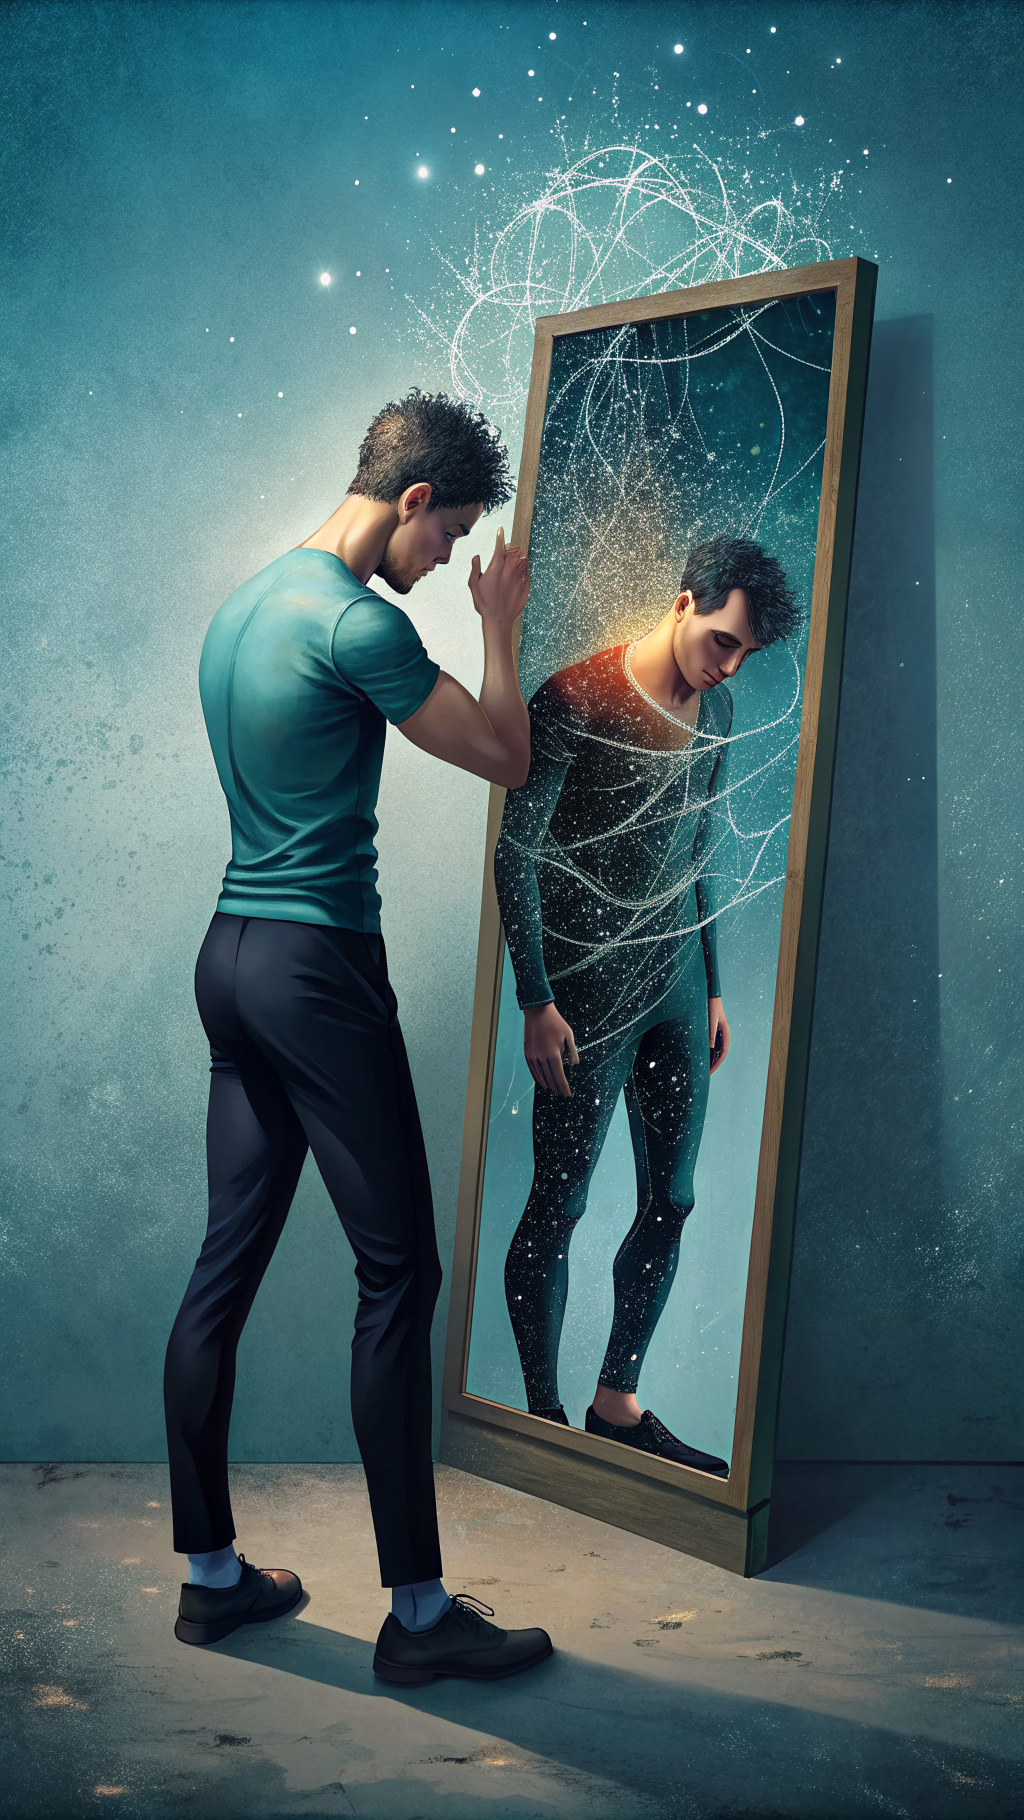 Imagine looking in the mirror and not recognizing the person staring back at you, as if someone else has taken control of your body and mind. Describe the unsettling feeling of engaging in unhealthy behaviors, as you struggle to regain a sense of control over your thoughts and actions.